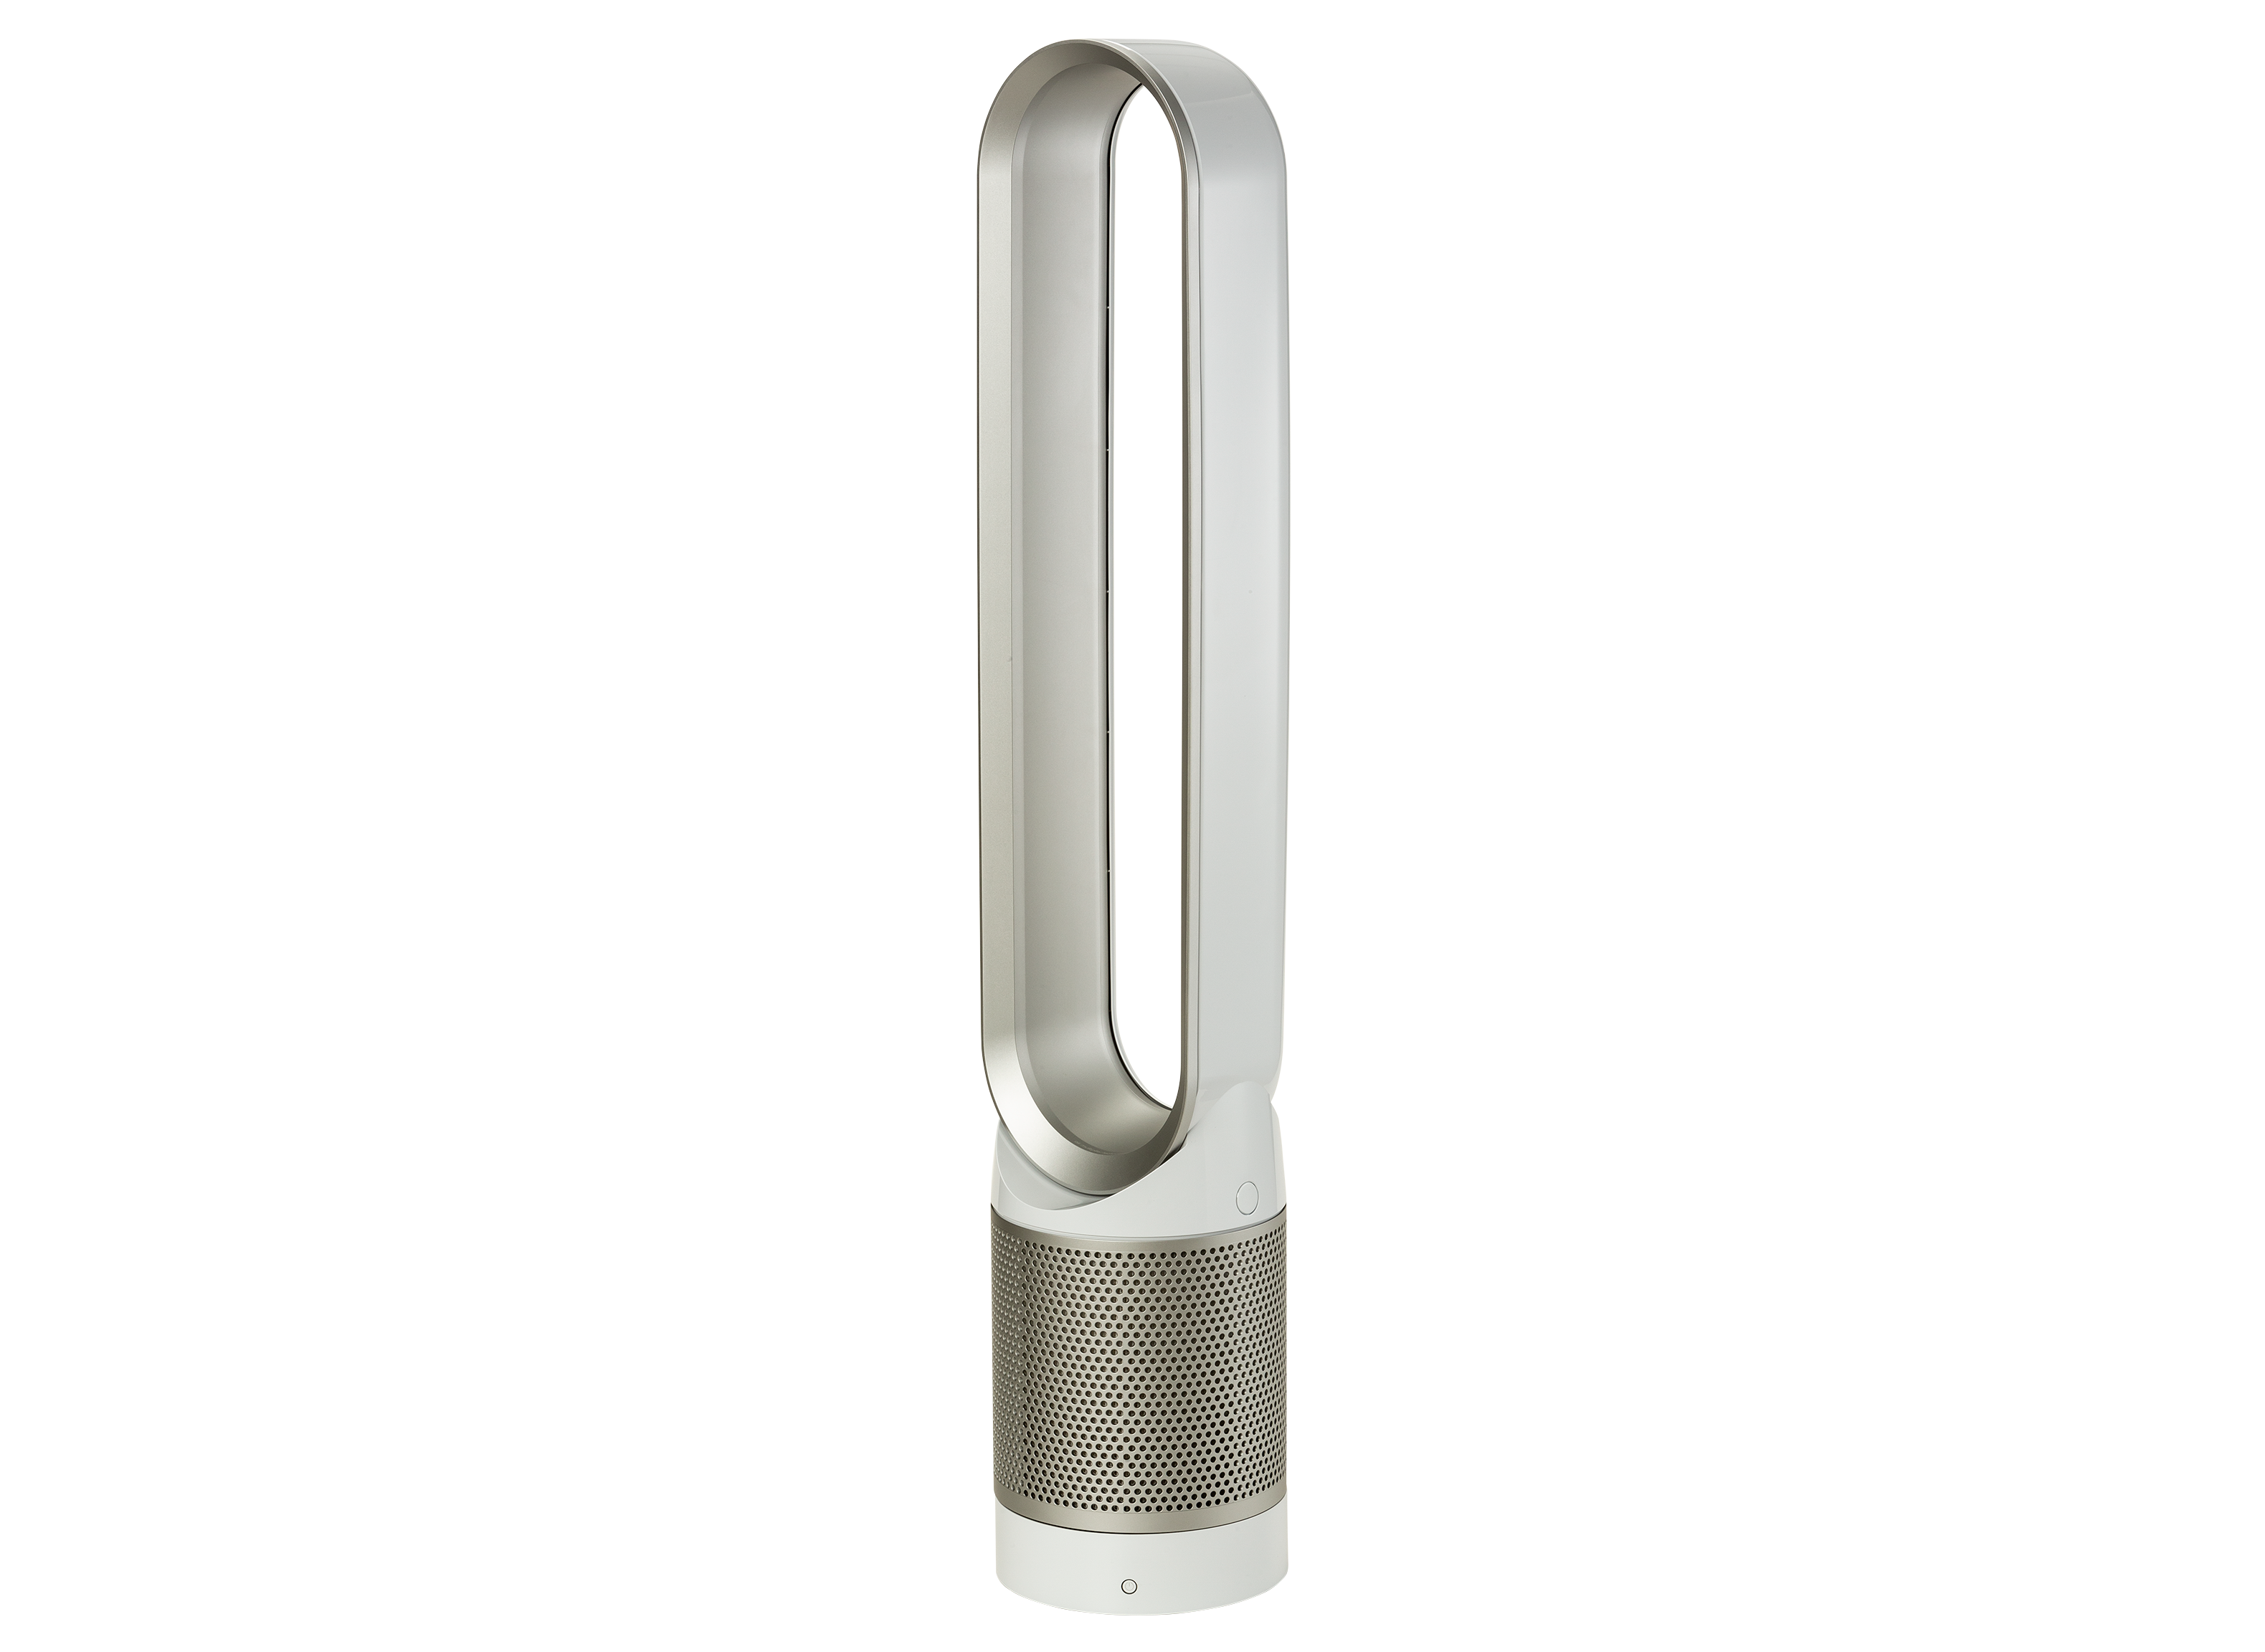 Dyson TP02 Pure Cool Link Air Purifier Review - Consumer Reports